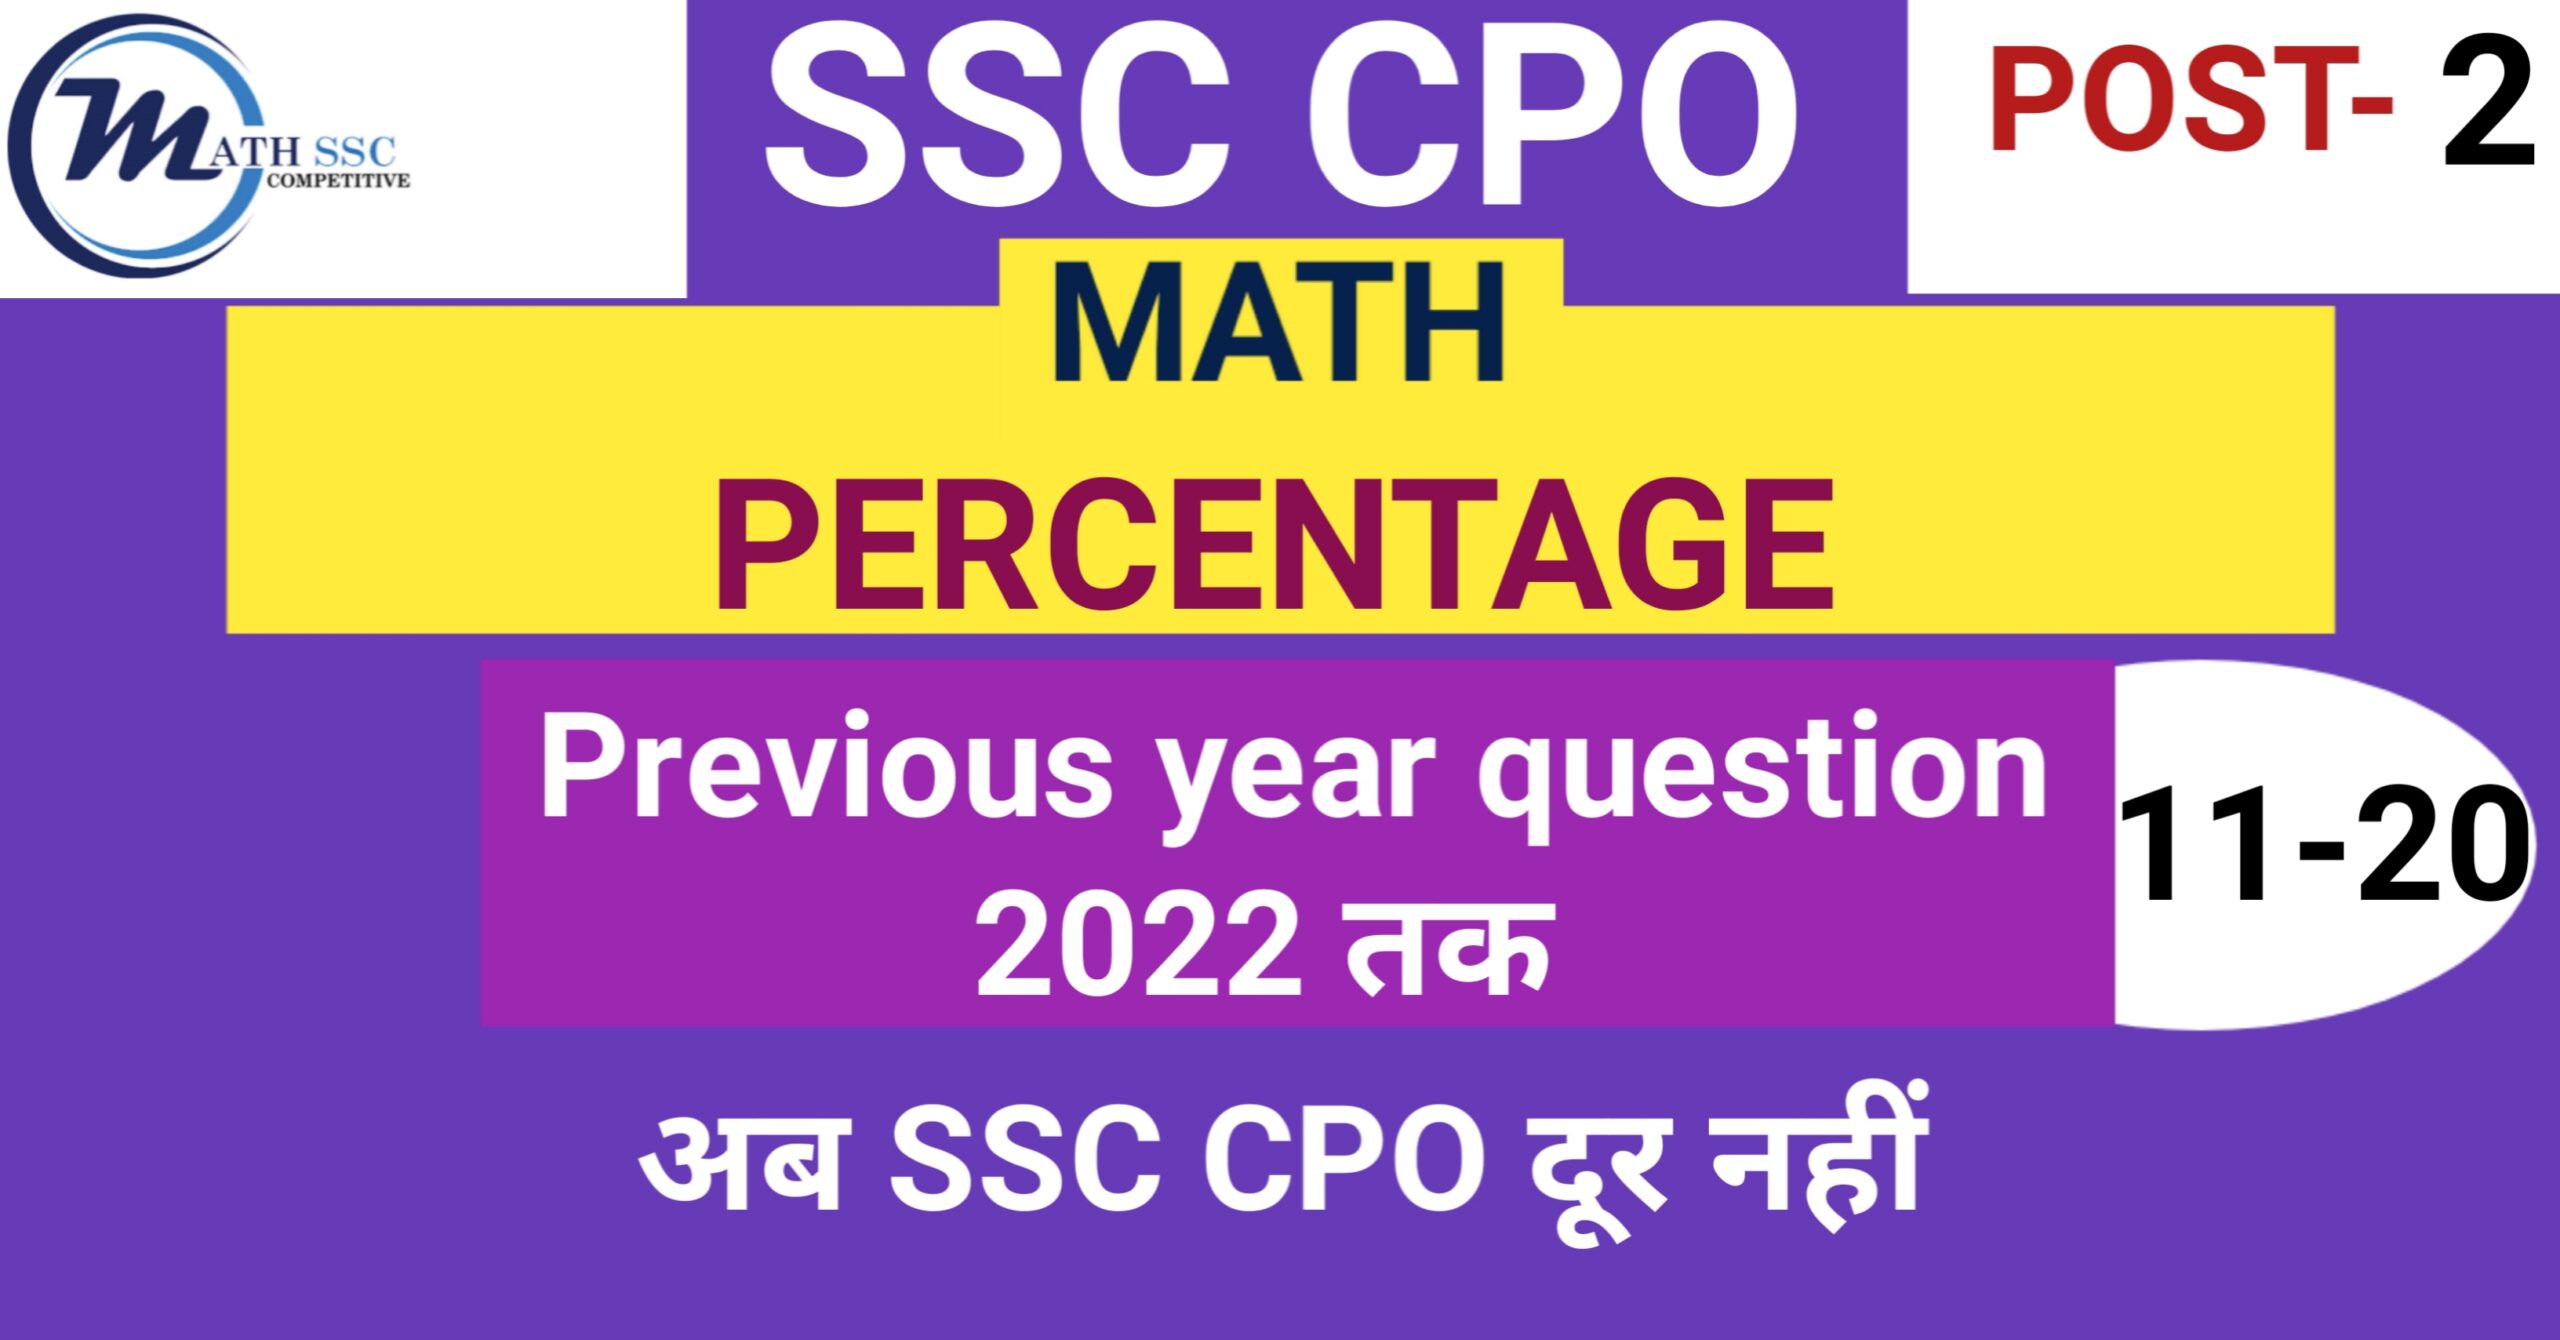 percentage questions for ssc cpo p2